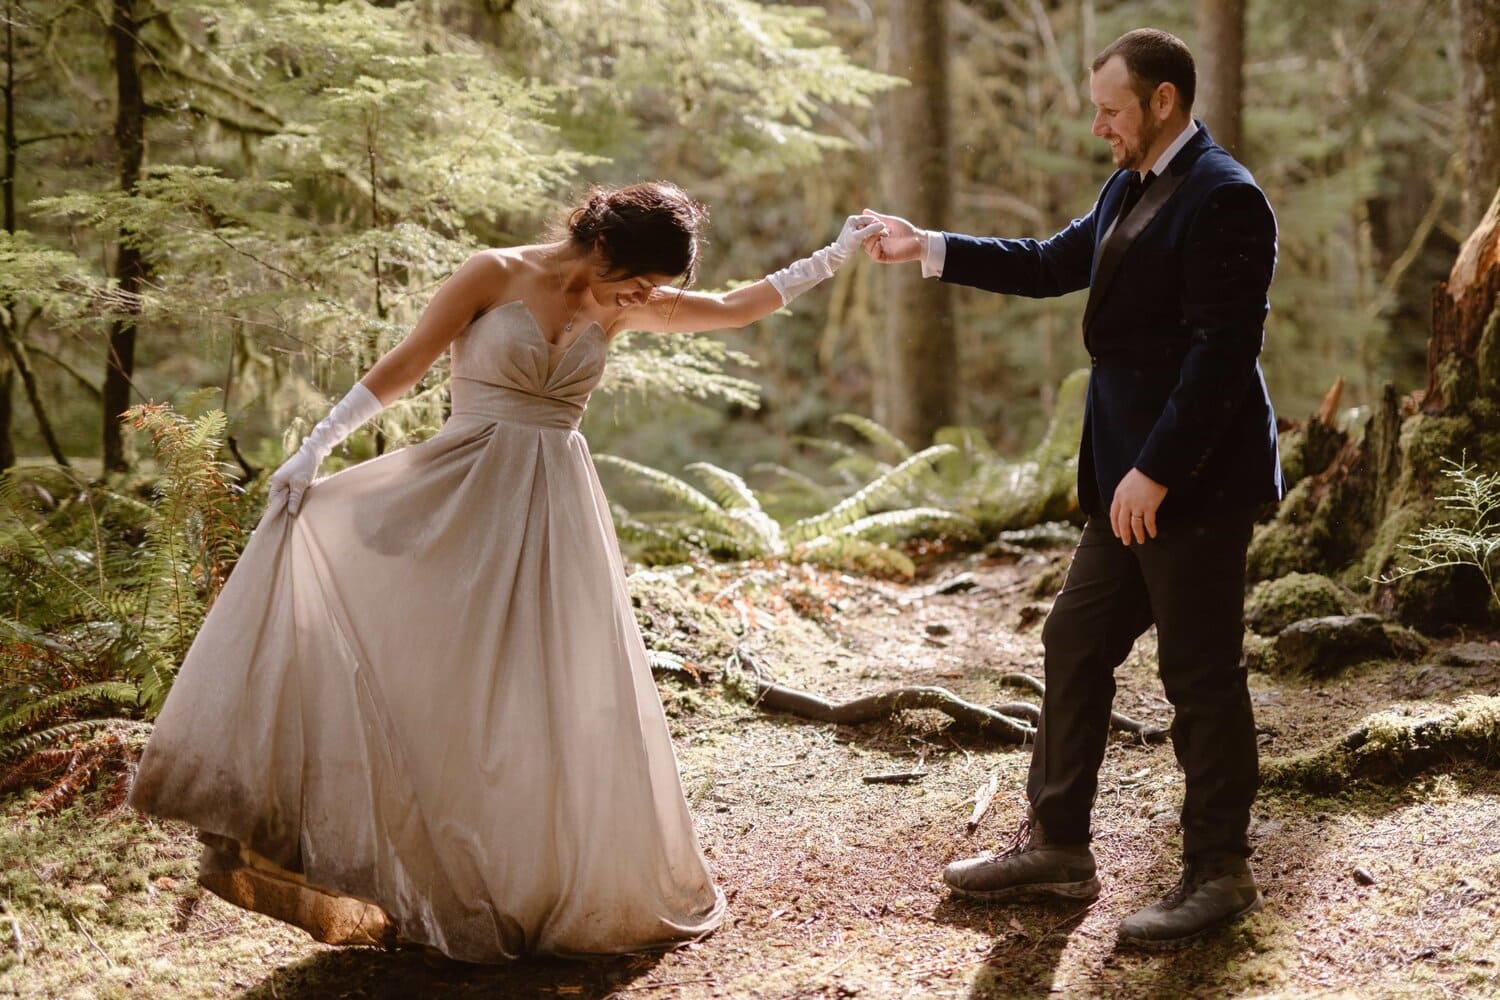 A groom holds his bride's hand in a forest. They both look at the bride's dress.